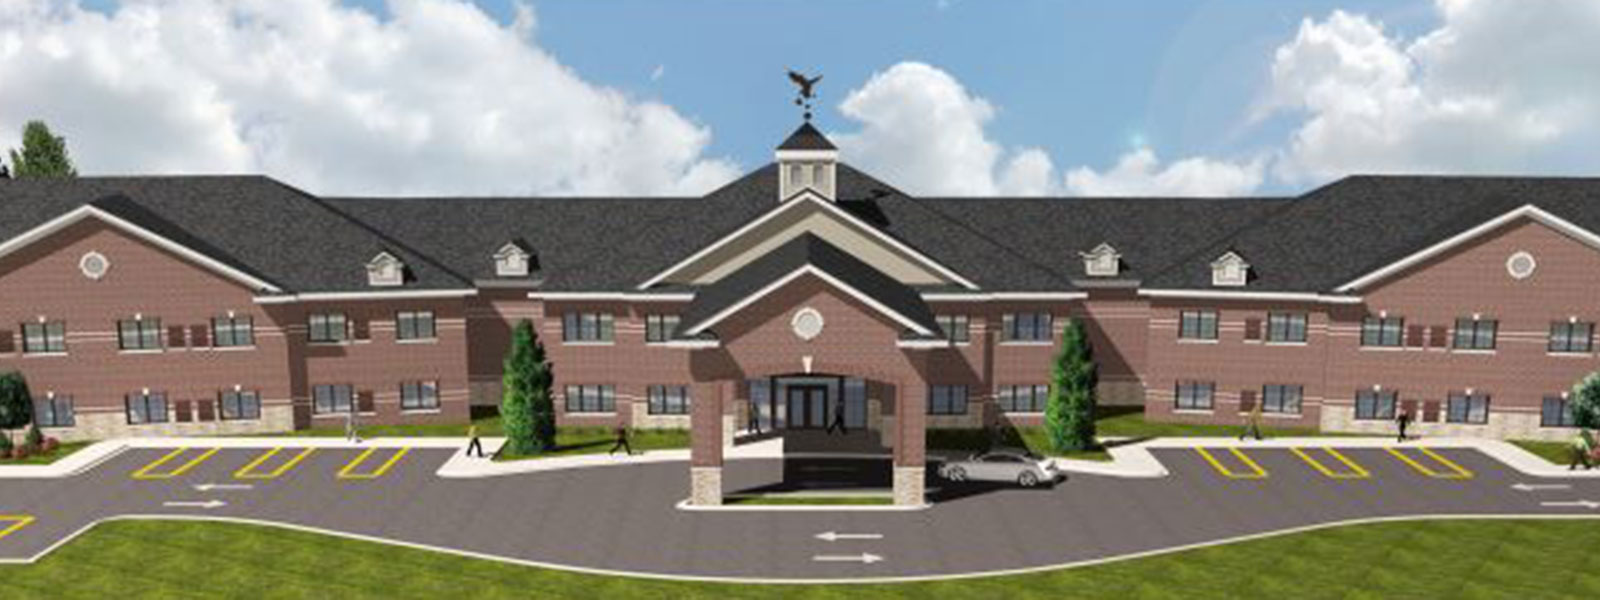 Maple Manor Howell exterior rendering banner image